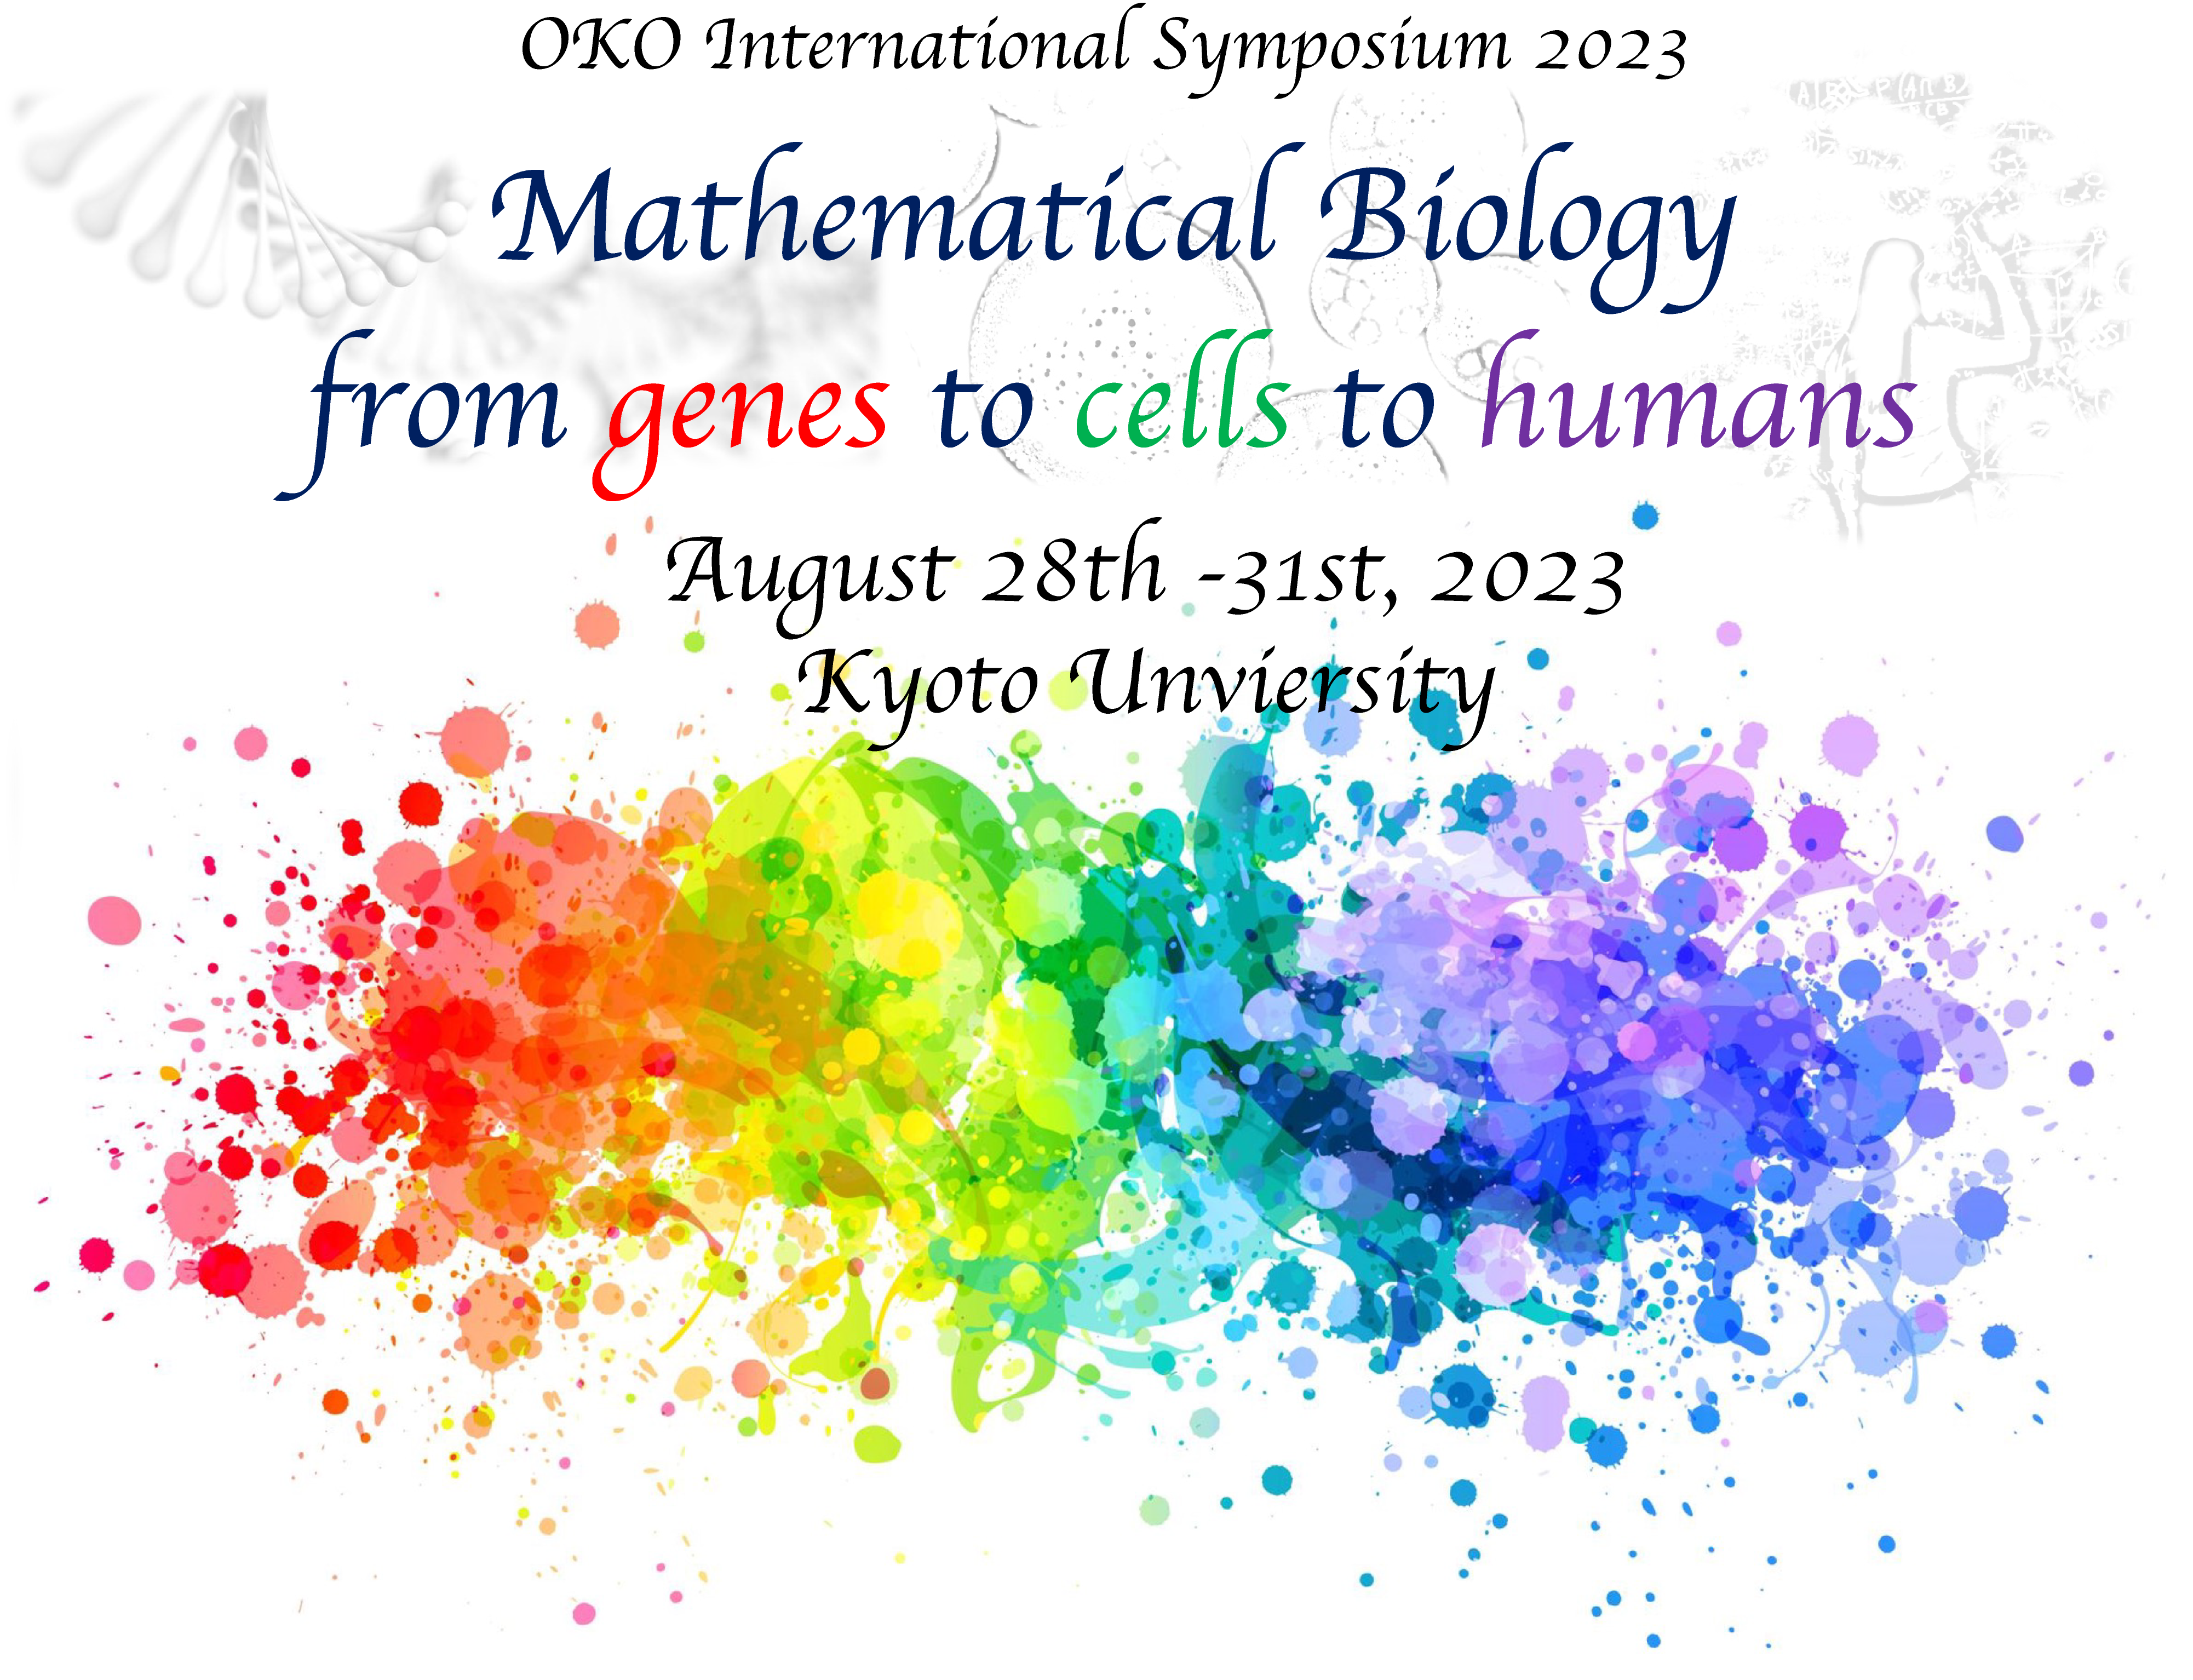 OKO International Symposium 2023「Mathematical Biology from Genes to Cells to Humans」を開催